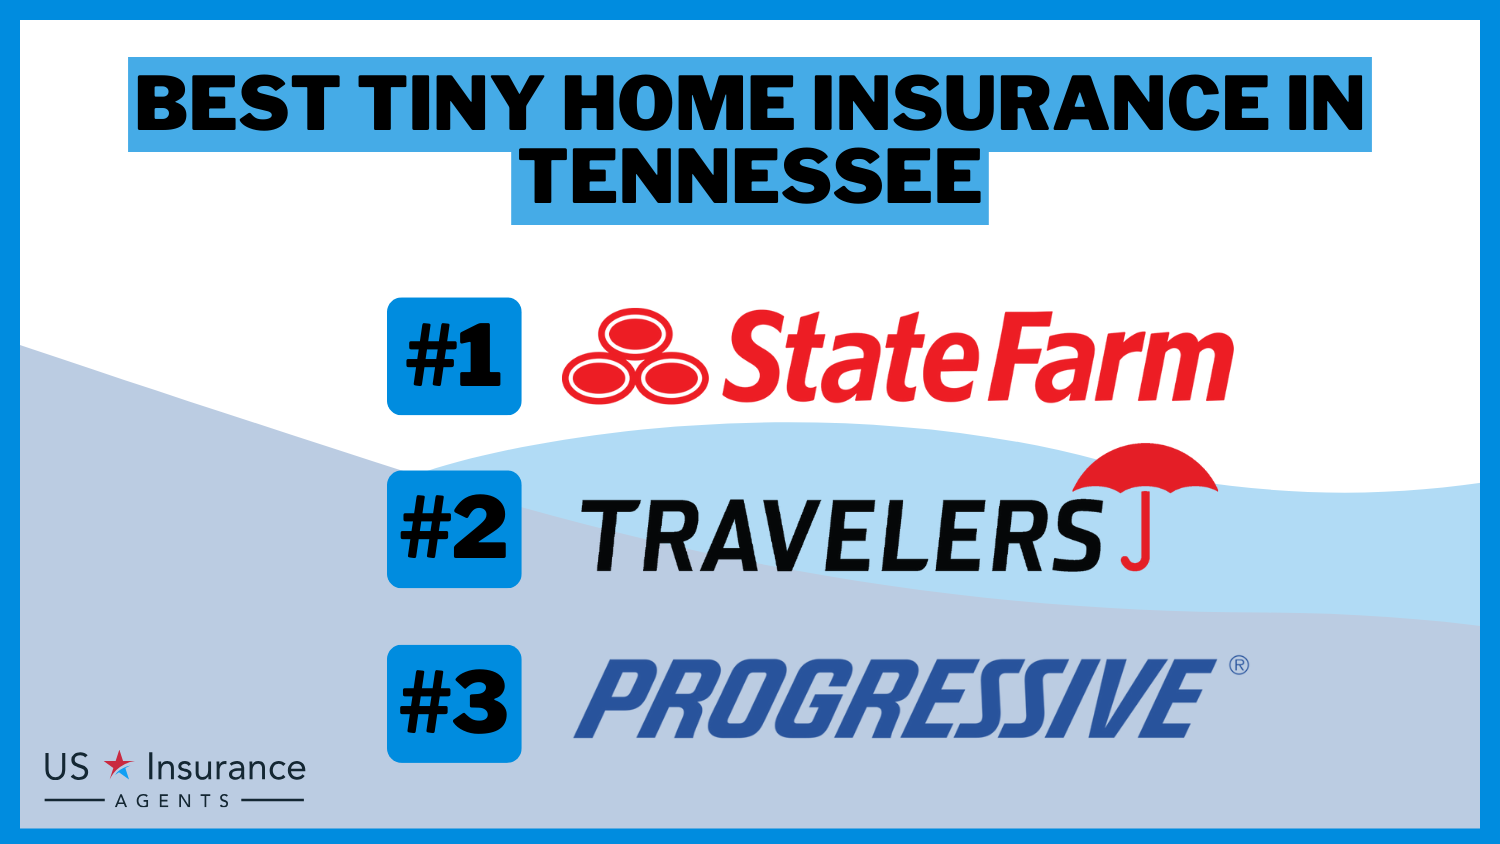 Best Tiny Home Insurance in Tennessee: State Farm, Travelers, and Progressive